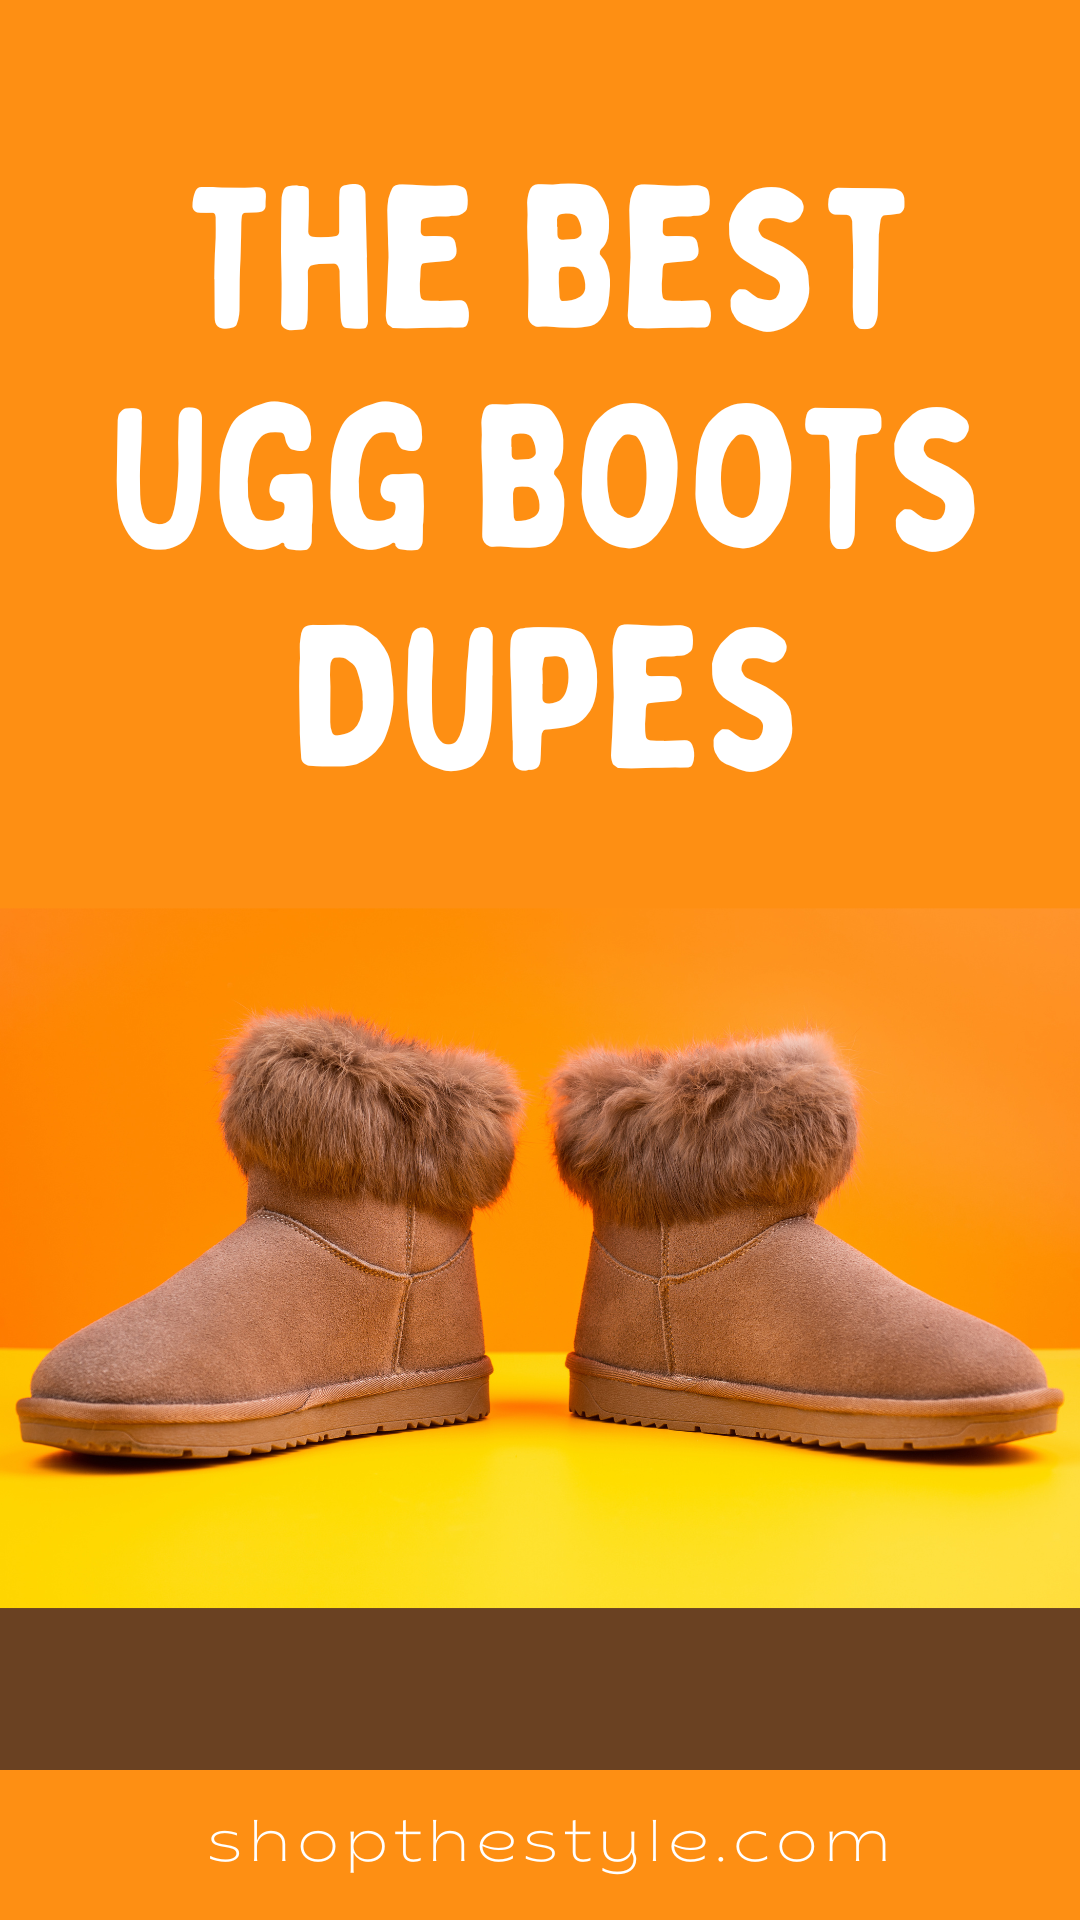 The Best Ugg Boots Dupes